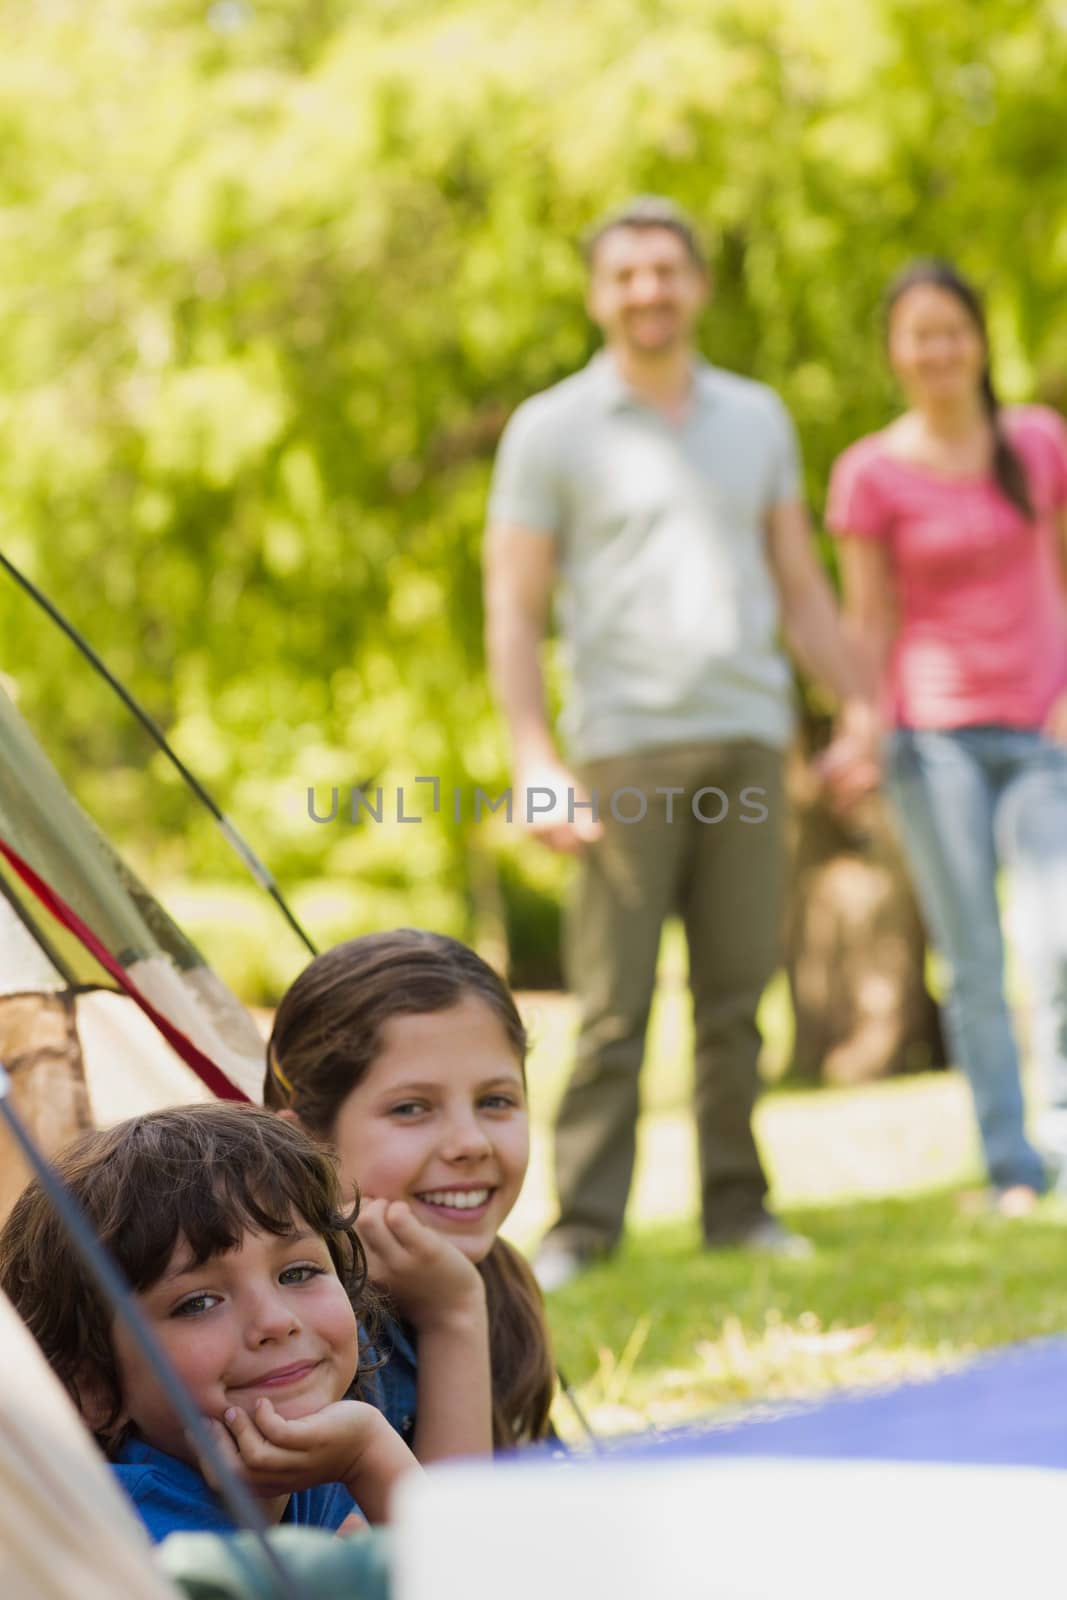 Portrait of kids in tent with blurred couple in background at park